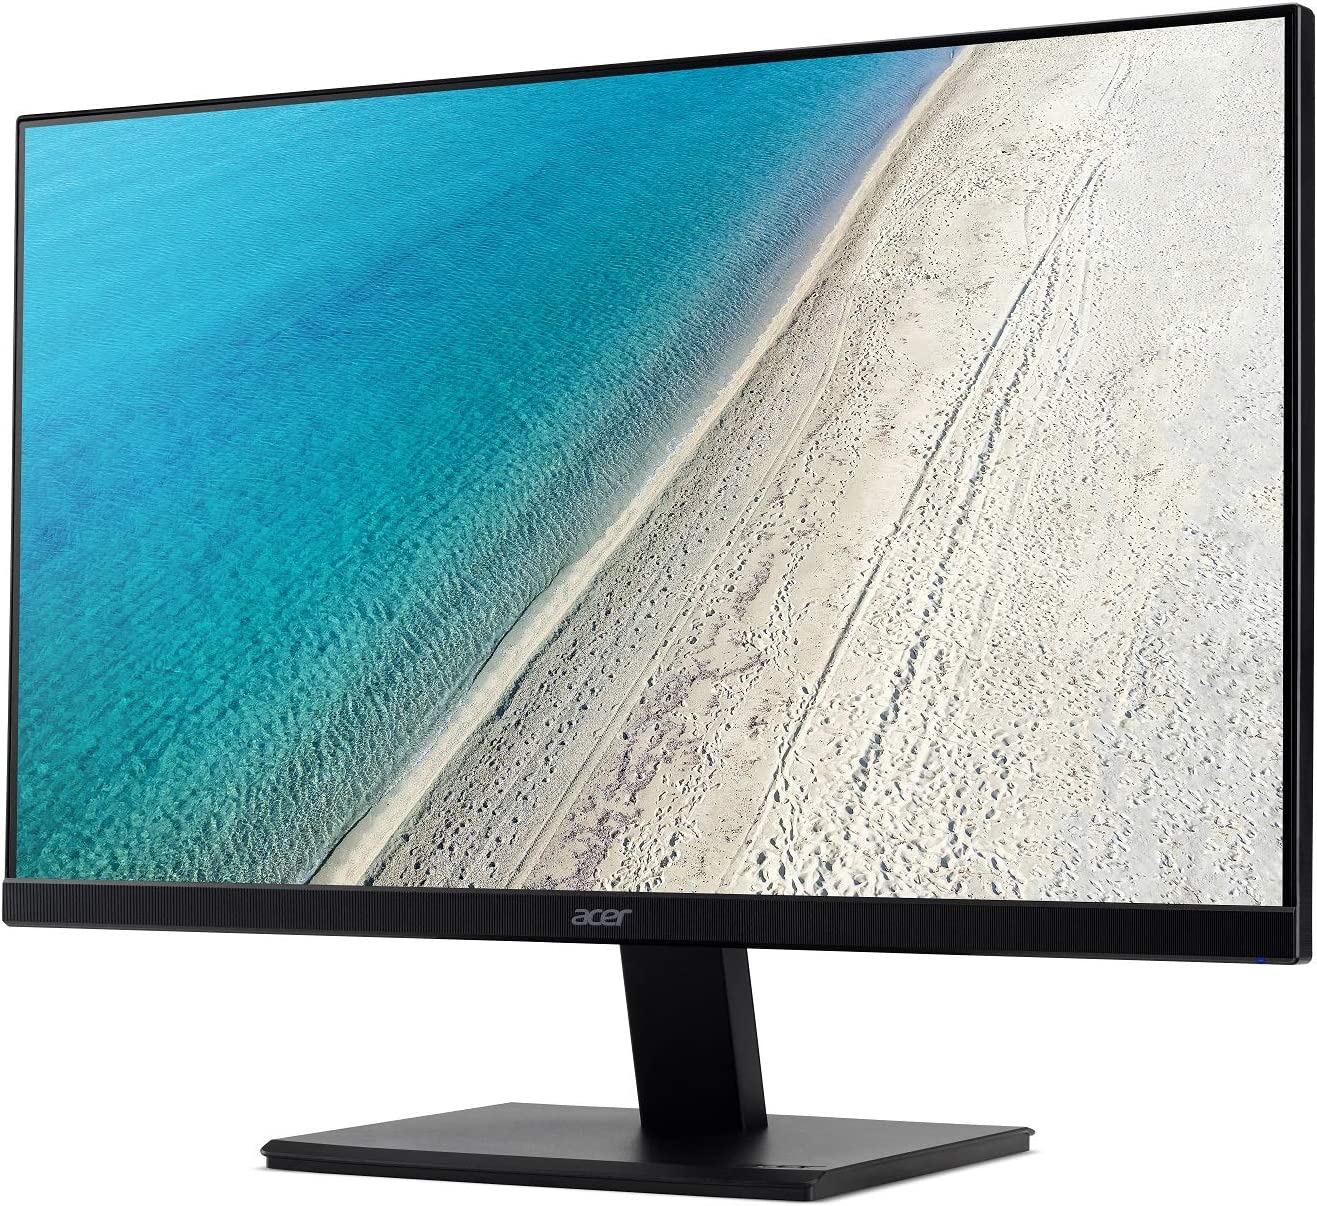 Acer 24" LED Widescreen Flat Panel LCD, IPS Technology, VGA/HDMI, Speakers,1920x1080, Black - MON-V247Y